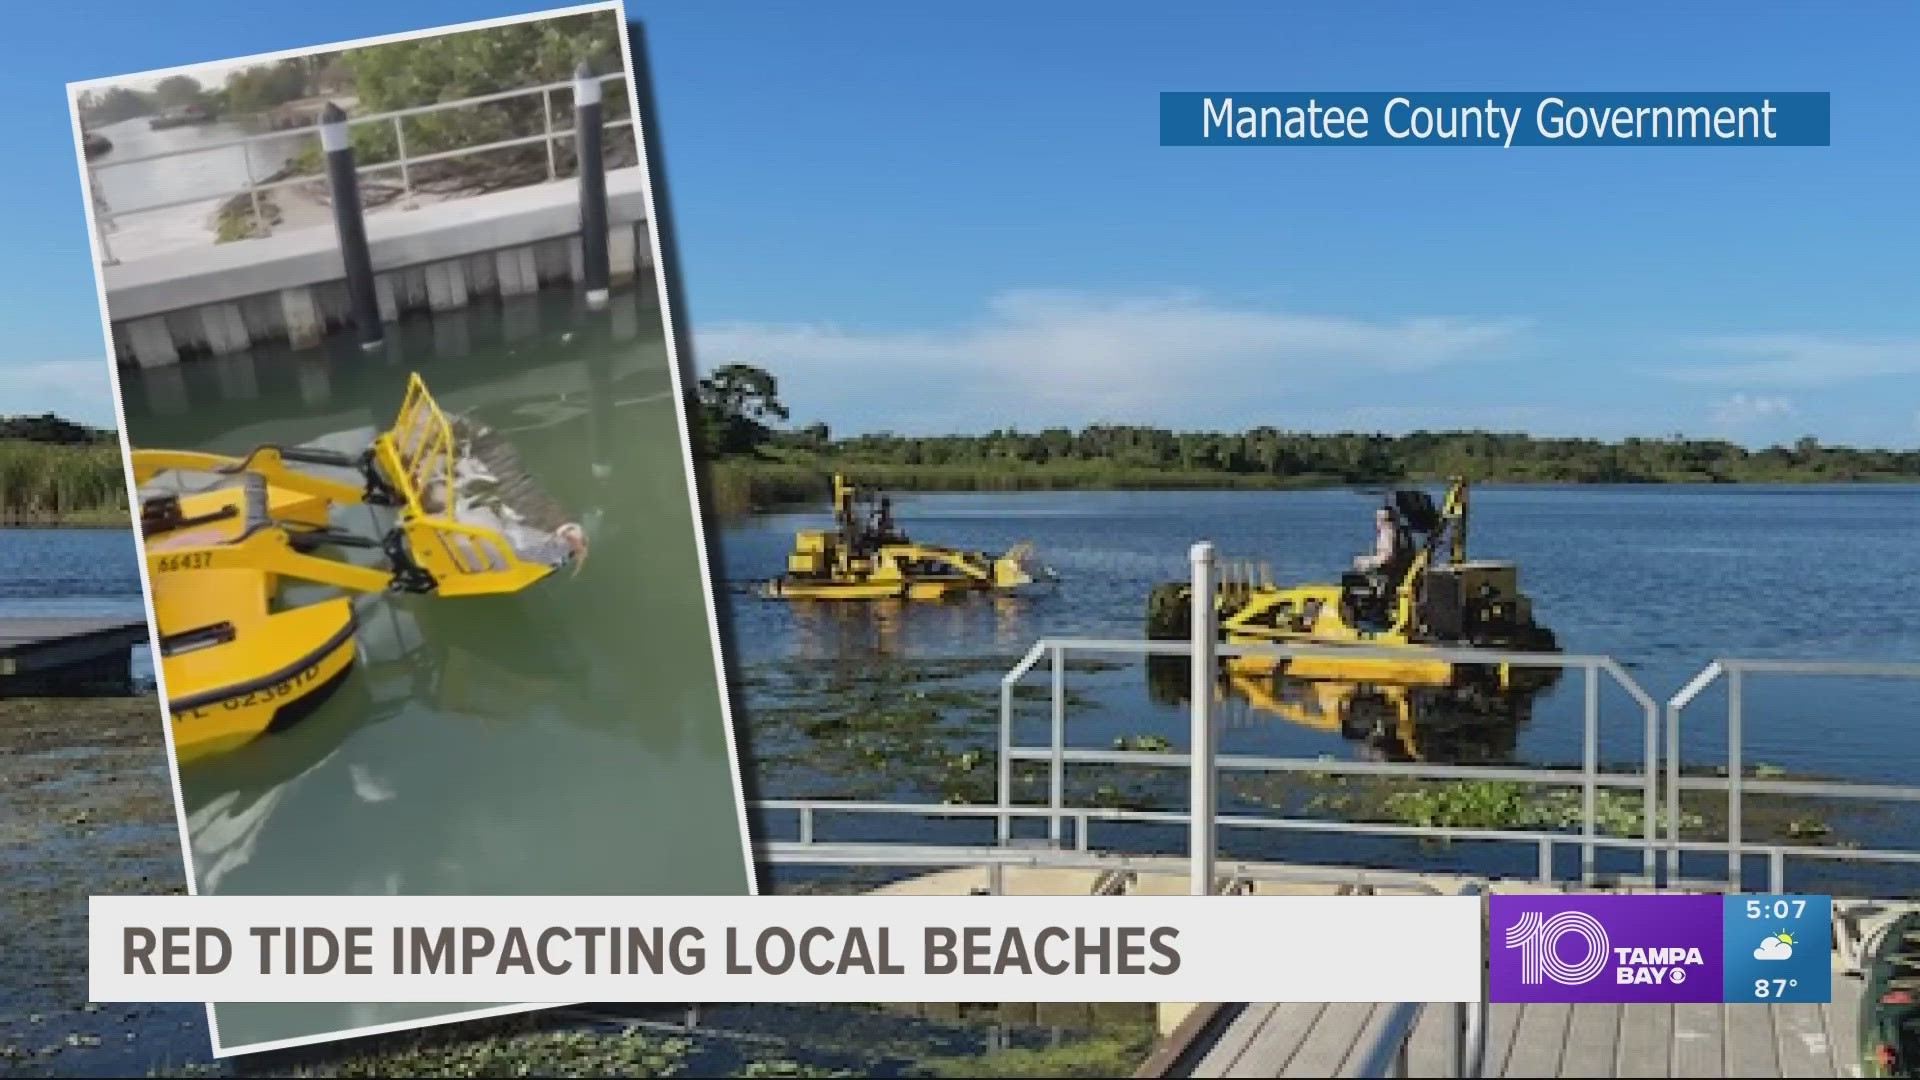 The situation is impacting many of the boating and kayaking activities and services.